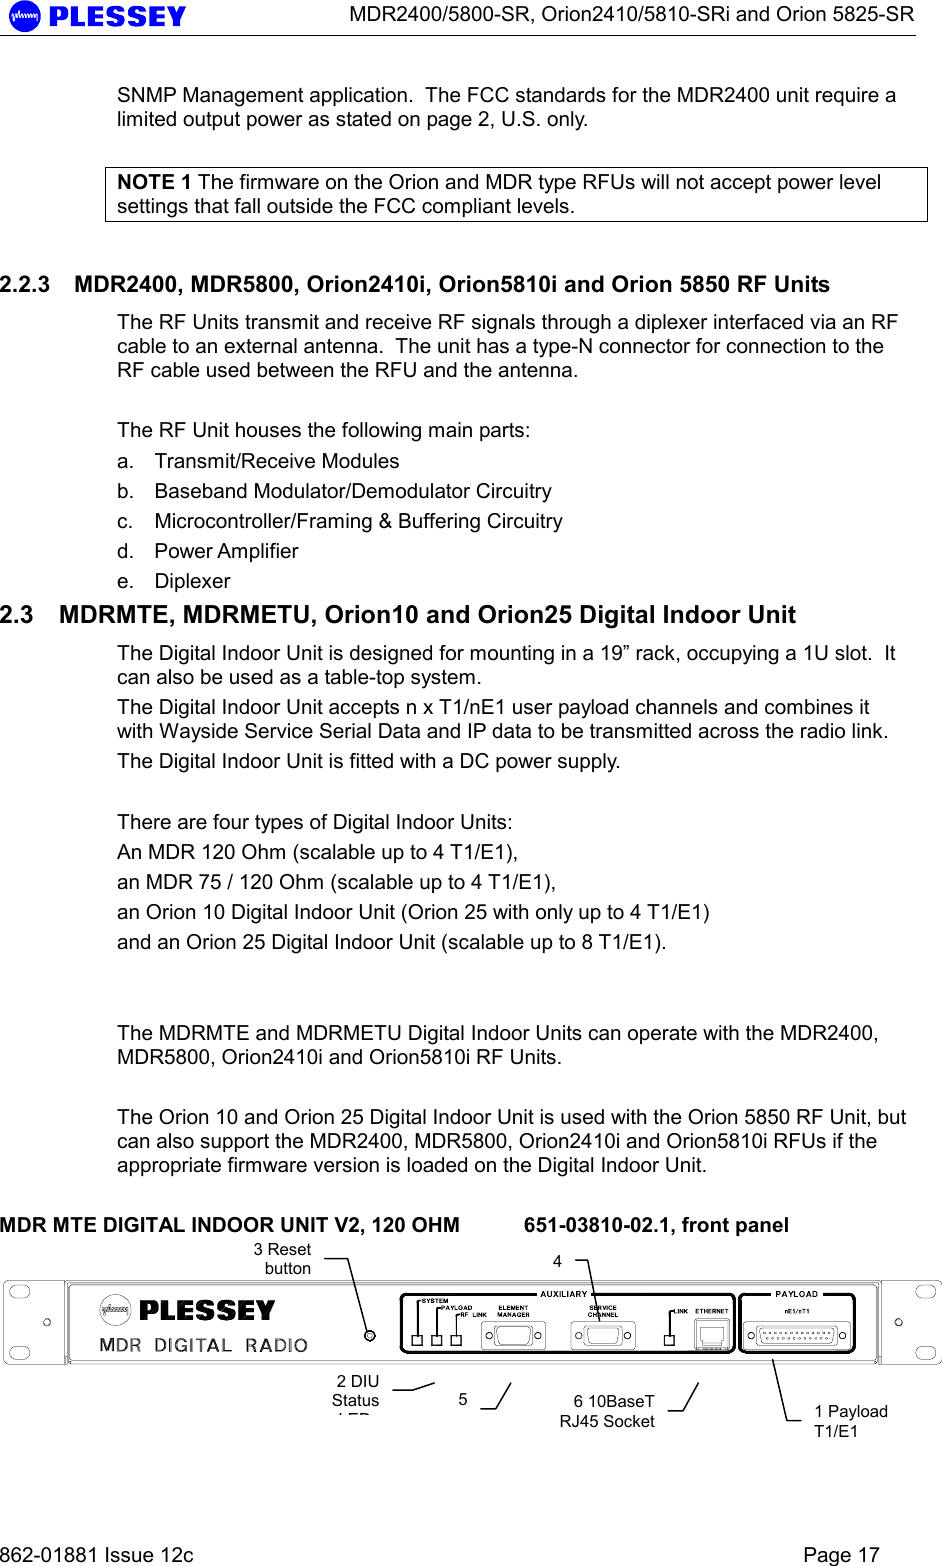      MDR2400/5800-SR, Orion2410/5810-SRi and Orion 5825-SR   862-01881 Issue 12c    Page 17 SNMP Management application.  The FCC standards for the MDR2400 unit require a limited output power as stated on page 2, U.S. only.   NOTE 1 The firmware on the Orion and MDR type RFUs will not accept power level settings that fall outside the FCC compliant levels. 2.2.3  MDR2400, MDR5800, Orion2410i, Orion5810i and Orion 5850 RF Units The RF Units transmit and receive RF signals through a diplexer interfaced via an RF cable to an external antenna.  The unit has a type-N connector for connection to the RF cable used between the RFU and the antenna.  The RF Unit houses the following main parts: a. Transmit/Receive Modules b.  Baseband Modulator/Demodulator Circuitry c.  Microcontroller/Framing &amp; Buffering Circuitry  d. Power Amplifier  e. Diplexer  2.3  MDRMTE, MDRMETU, Orion10 and Orion25 Digital Indoor Unit The Digital Indoor Unit is designed for mounting in a 19” rack, occupying a 1U slot.  It can also be used as a table-top system. The Digital Indoor Unit accepts n x T1/nE1 user payload channels and combines it with Wayside Service Serial Data and IP data to be transmitted across the radio link. The Digital Indoor Unit is fitted with a DC power supply.  There are four types of Digital Indoor Units: An MDR 120 Ohm (scalable up to 4 T1/E1),  an MDR 75 / 120 Ohm (scalable up to 4 T1/E1), an Orion 10 Digital Indoor Unit (Orion 25 with only up to 4 T1/E1) and an Orion 25 Digital Indoor Unit (scalable up to 8 T1/E1).       The MDRMTE and MDRMETU Digital Indoor Units can operate with the MDR2400, MDR5800, Orion2410i and Orion5810i RF Units.  The Orion 10 and Orion 25 Digital Indoor Unit is used with the Orion 5850 RF Unit, but can also support the MDR2400, MDR5800, Orion2410i and Orion5810i RFUs if the appropriate firmware version is loaded on the Digital Indoor Unit.  MDR MTE DIGITAL INDOOR UNIT V2, 120 OHM  651-03810-02.1, front panel    1 Payload T1/E1 2 DIU StatusLED3 Reset button 456 10BaseTRJ45 Socket